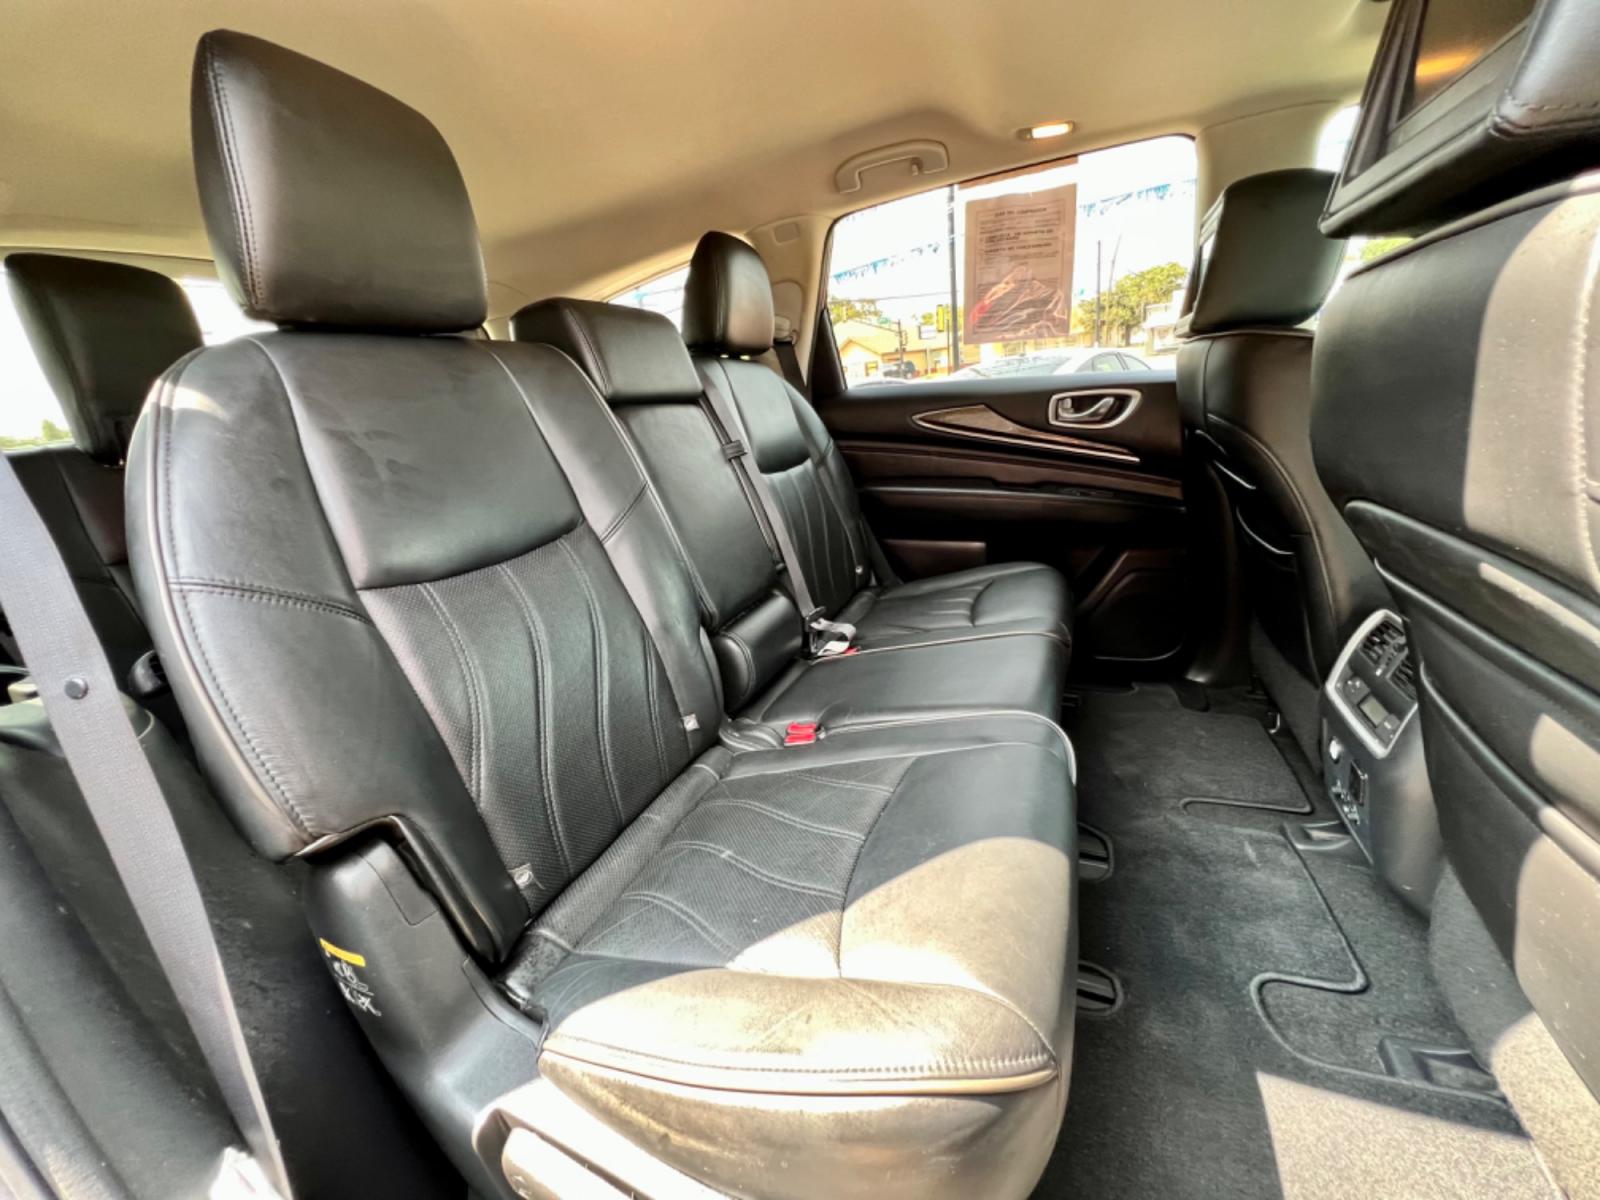 2014 GRAY INFINITI QX60 (5N1AL0MN1EC) , located at 5900 E. Lancaster Ave., Fort Worth, TX, 76112, (817) 457-5456, 0.000000, 0.000000 - This is a 2014 INFINITI QX60 4 DOOR SUV that is in excellent condition. There are no dents or scratches. The interior is clean with no rips or tears or stains. All power windows, door locks and seats. Ice cold AC for those hot Texas summer days. It is equipped with a CD player, AM/FM radio, AUX port - Photo #14